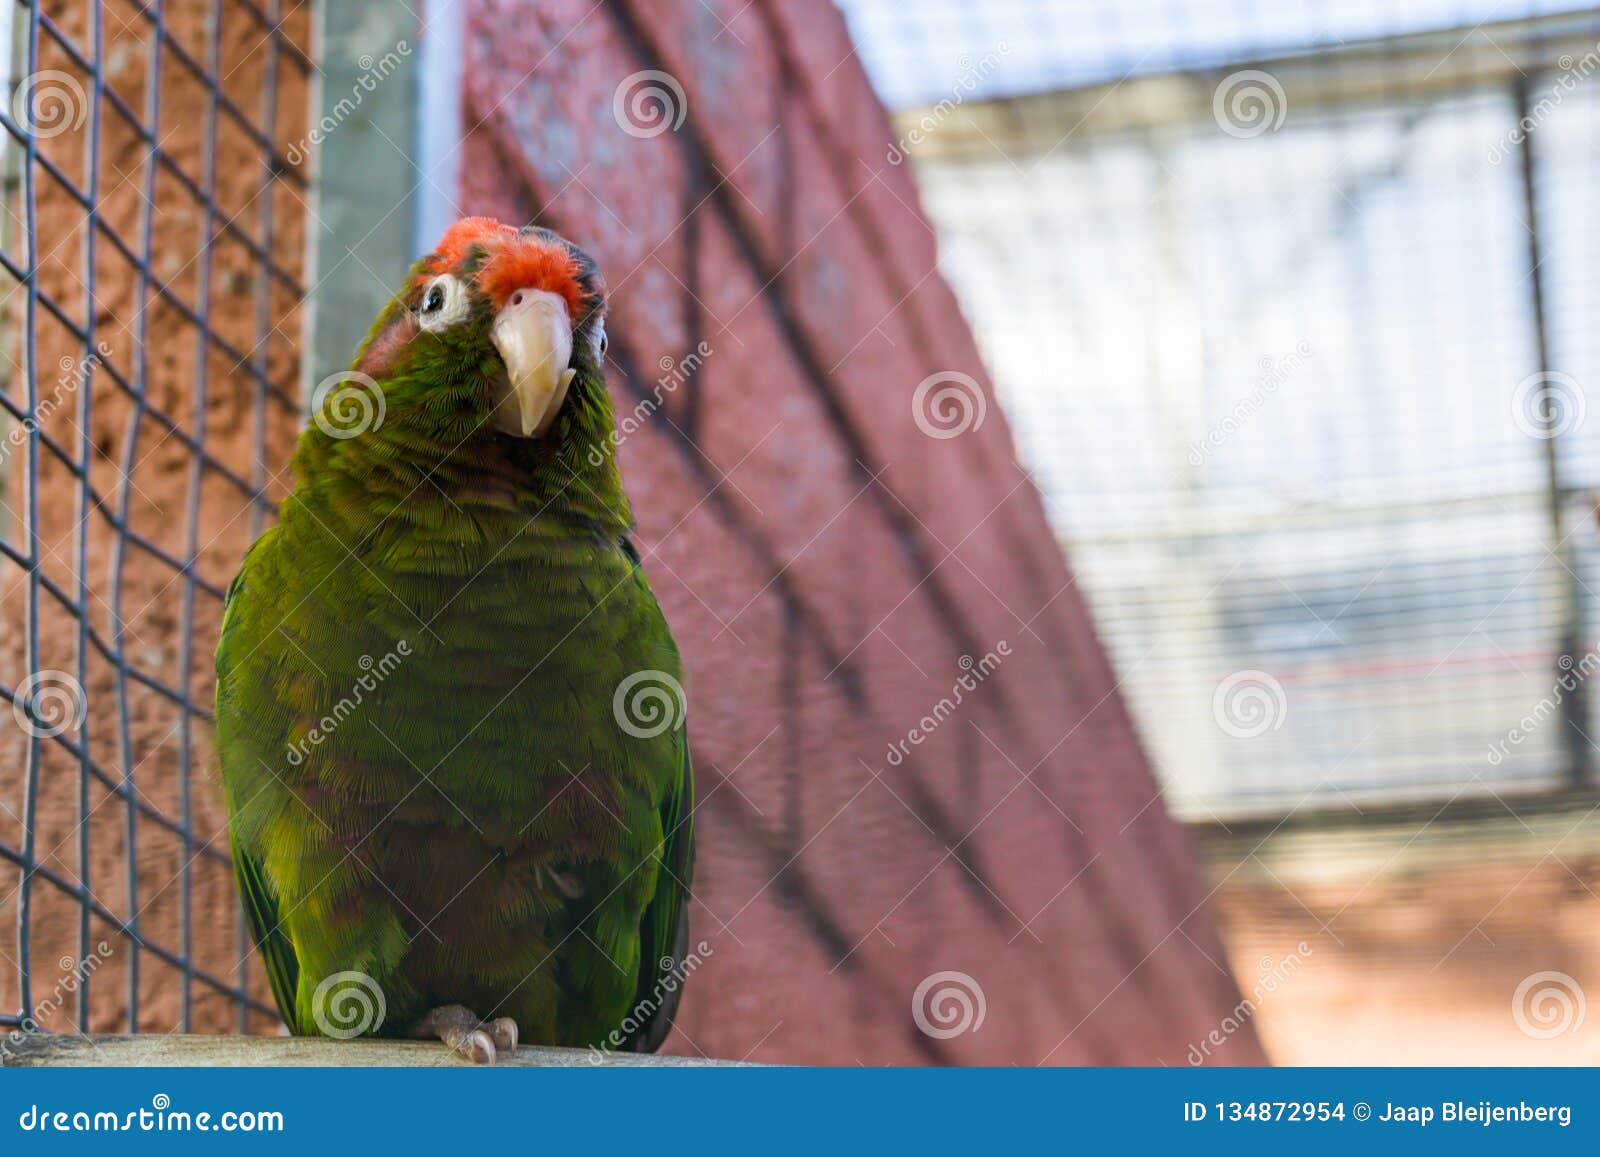 crimson fronted parakeet, a tropical green parrot from america